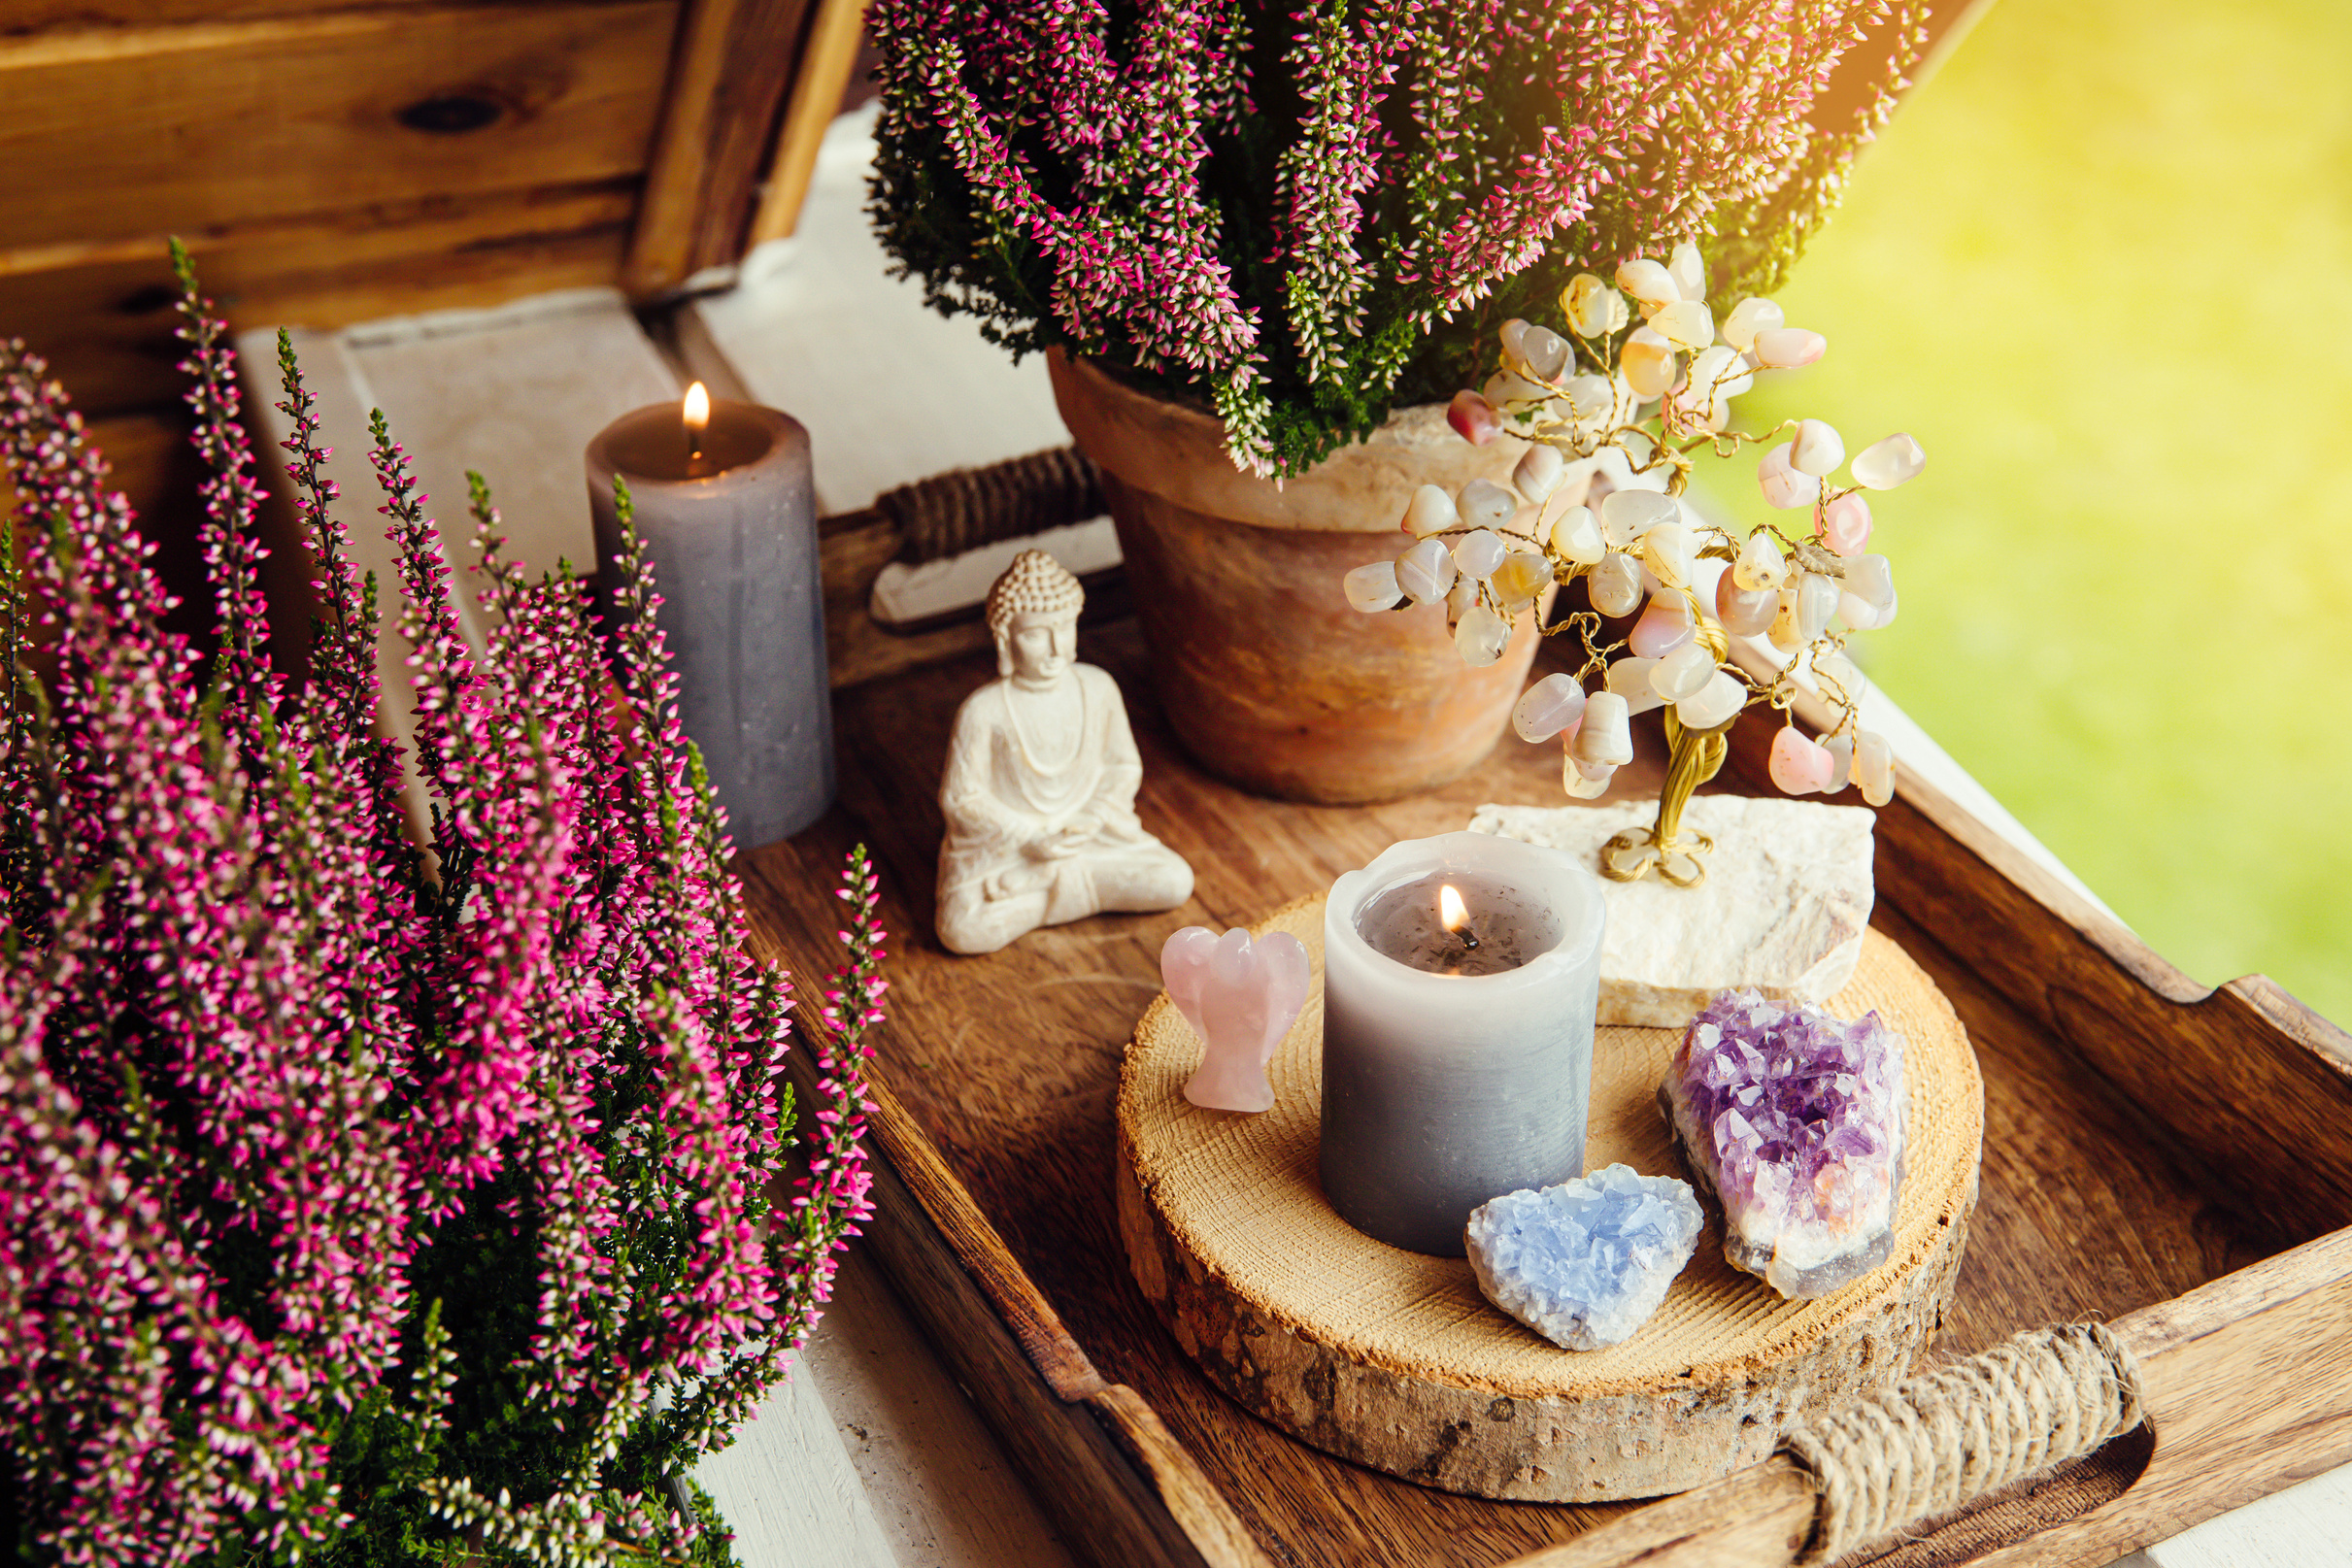 Spiritual home balcony decor with heather flowers, candles.